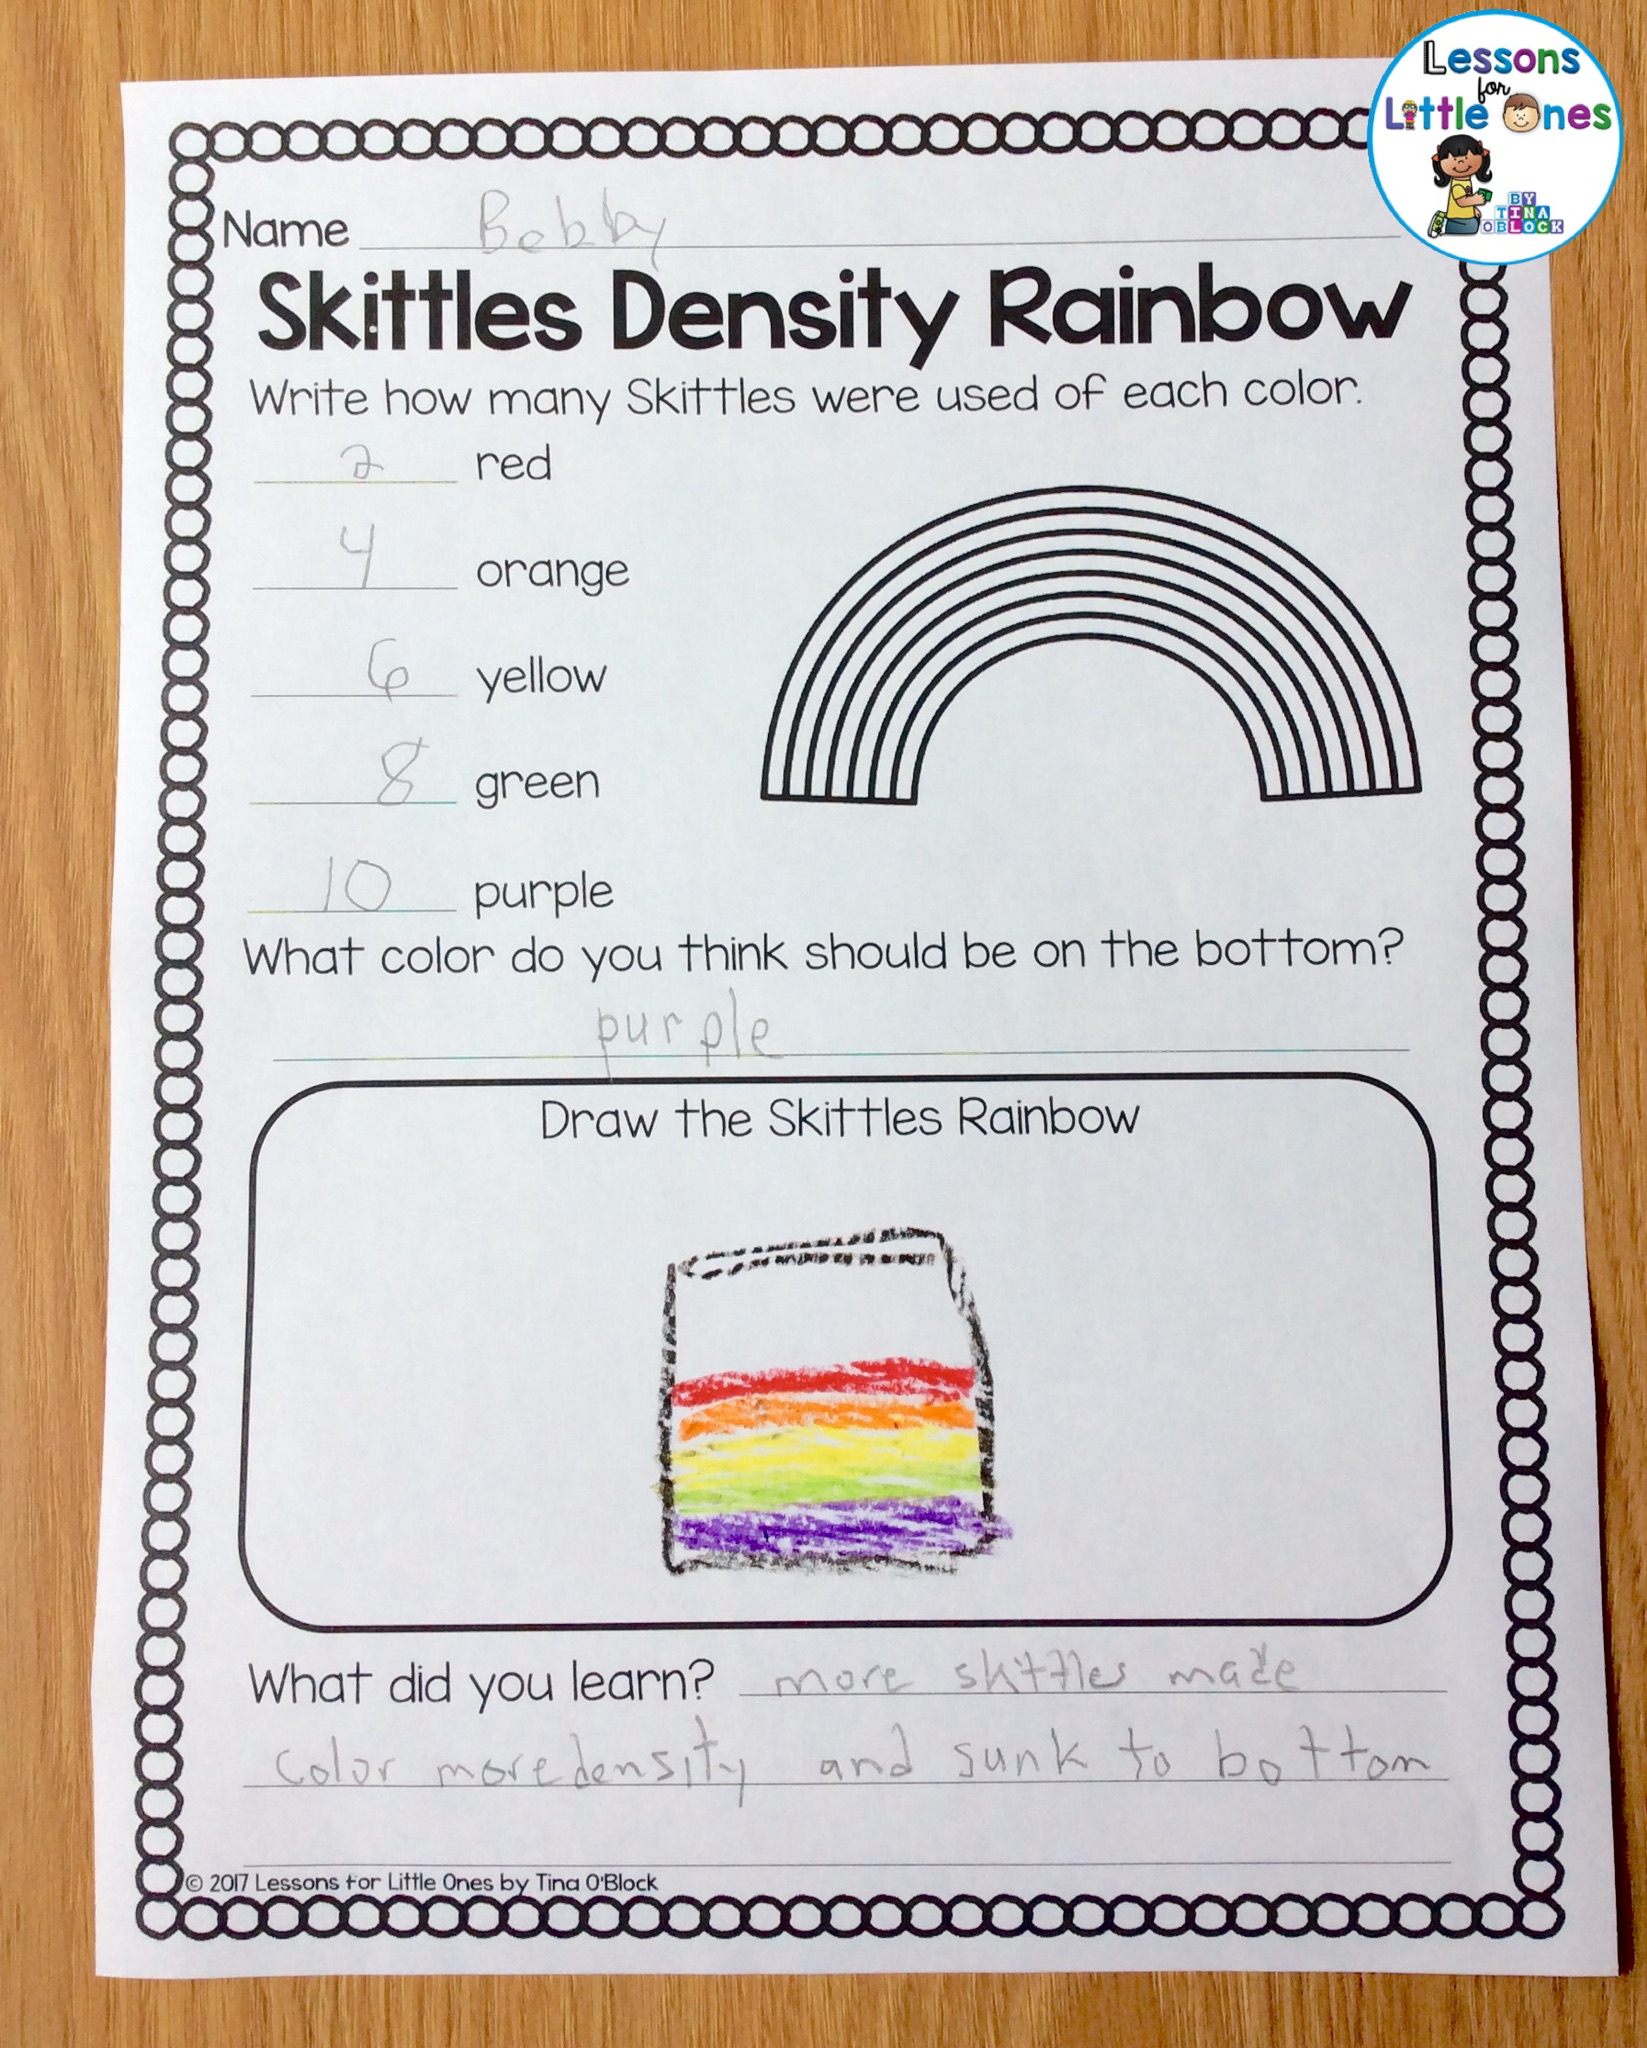 Skittles Rainbow experiment page